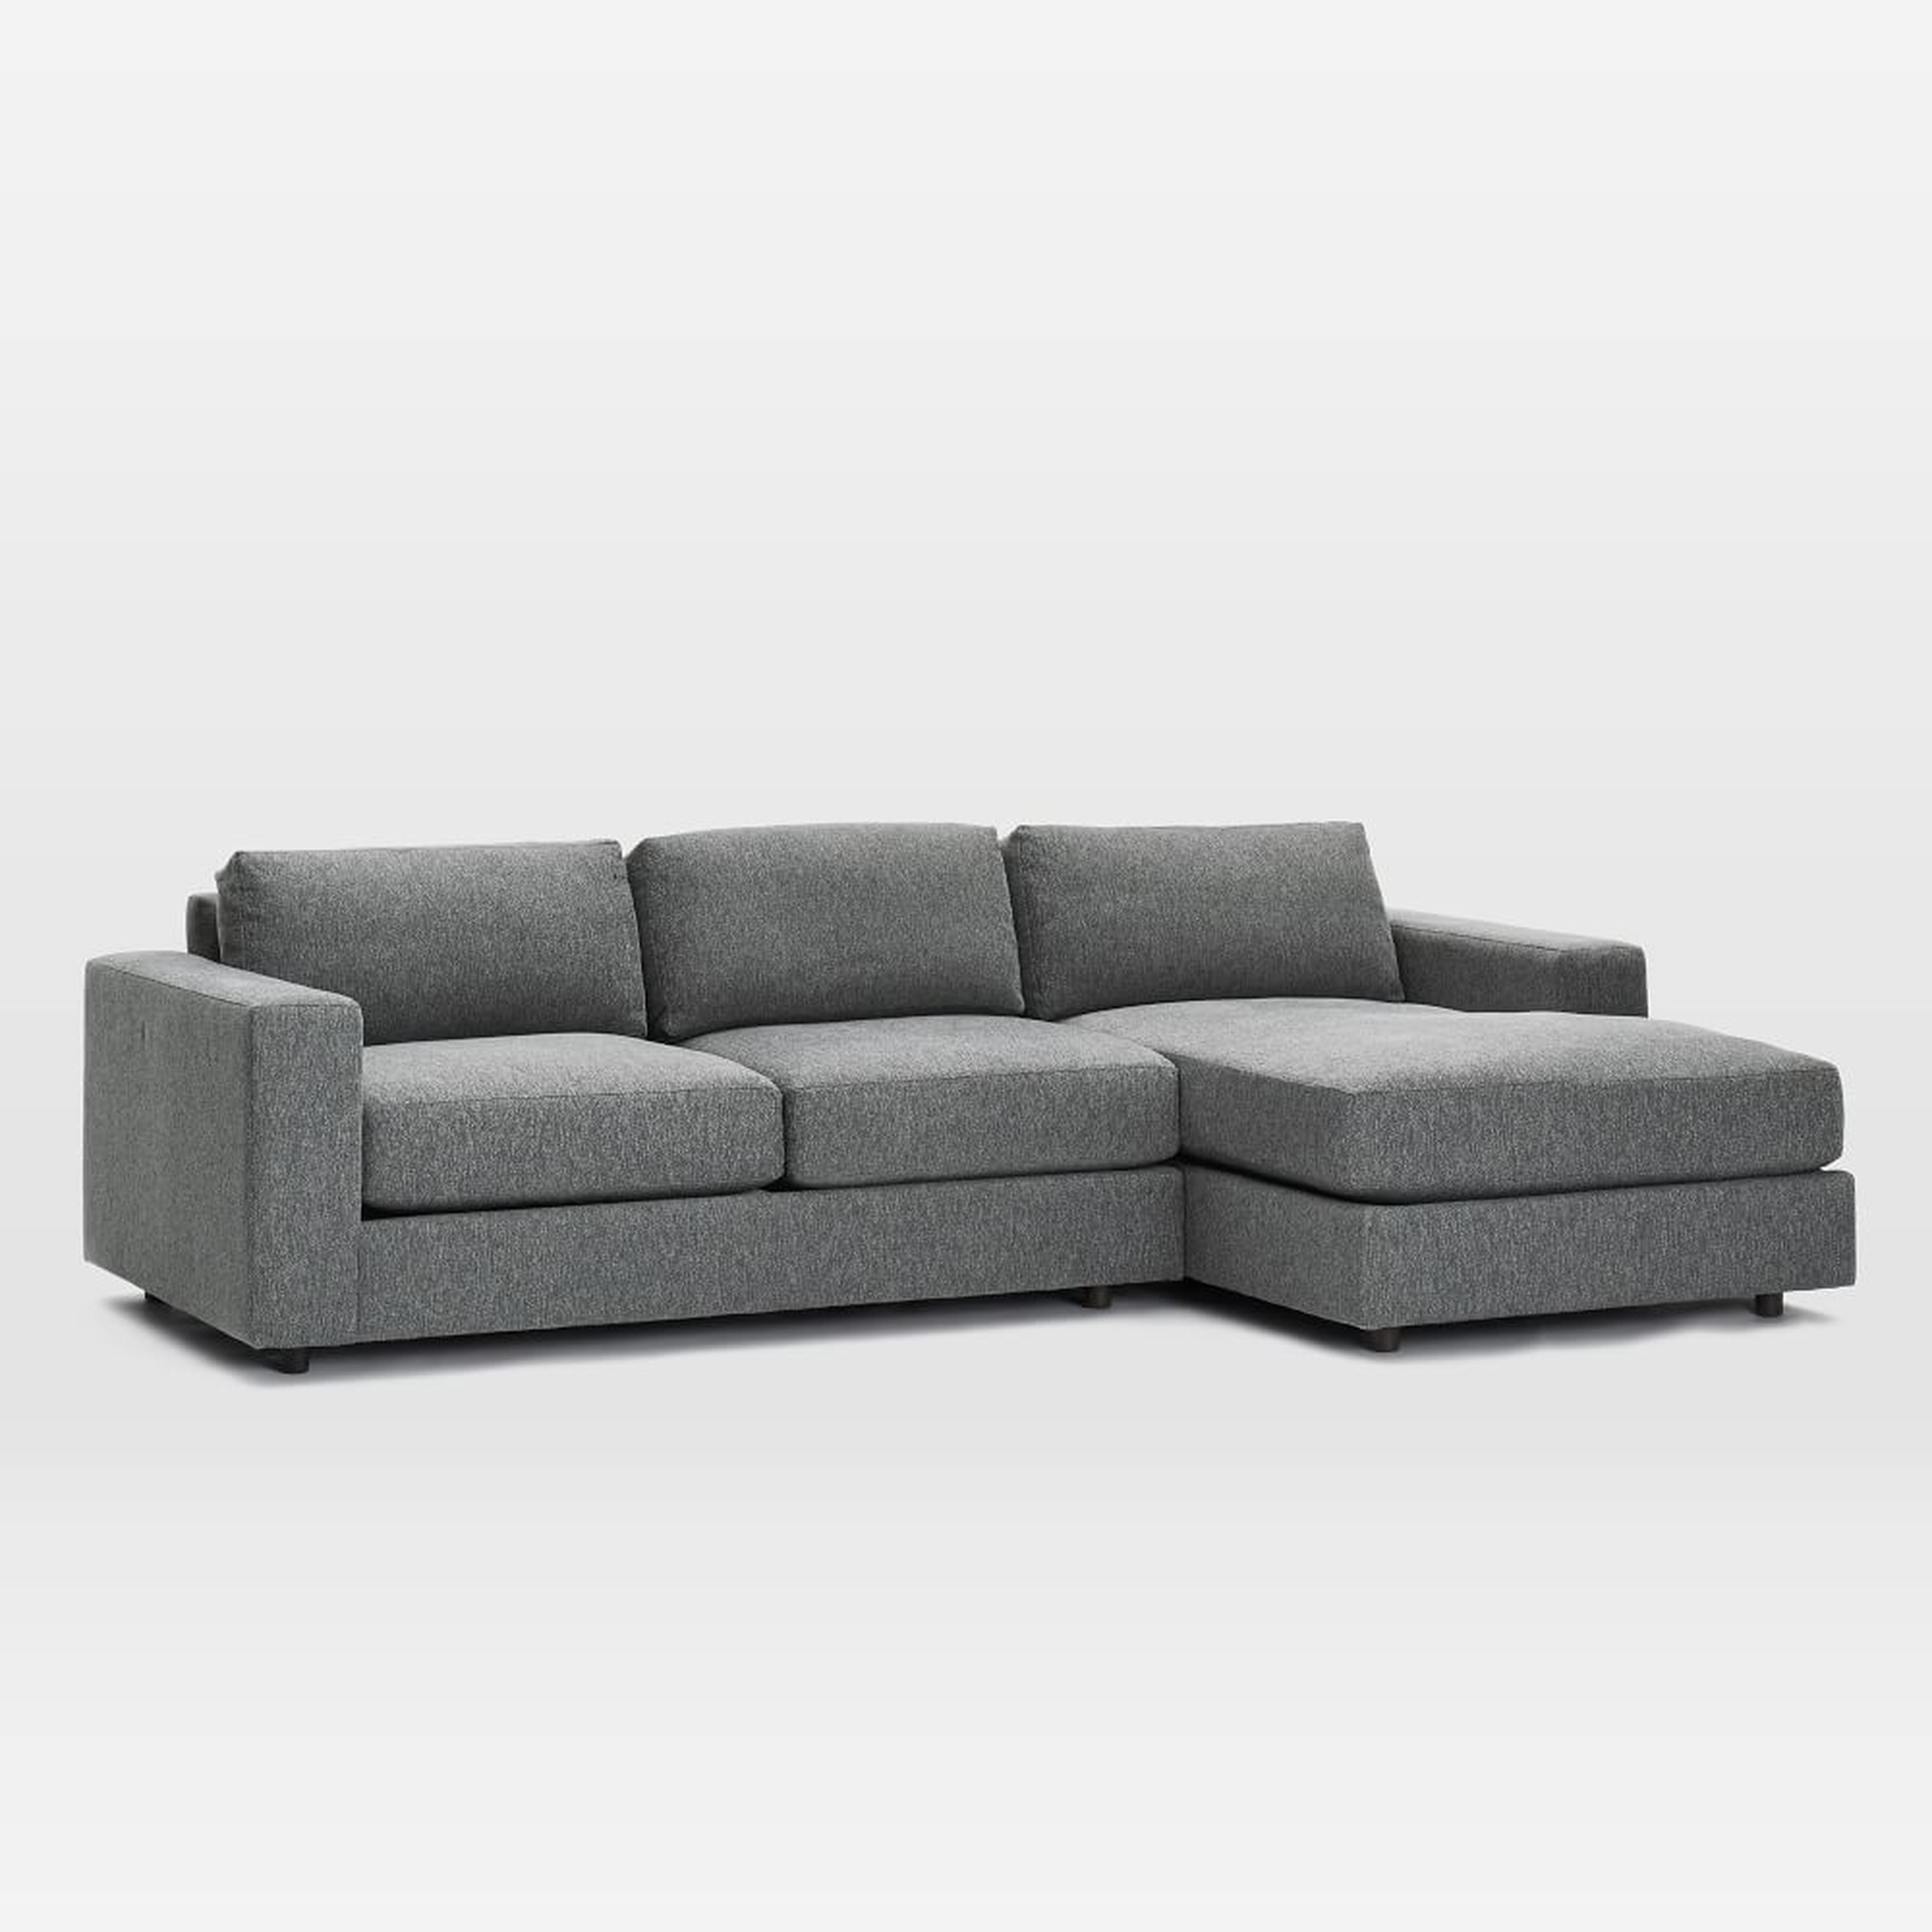 Urban 106" Right 2-Piece Chaise Sectional, Chenille Tweed, Pewter, Down Blend Fill - West Elm